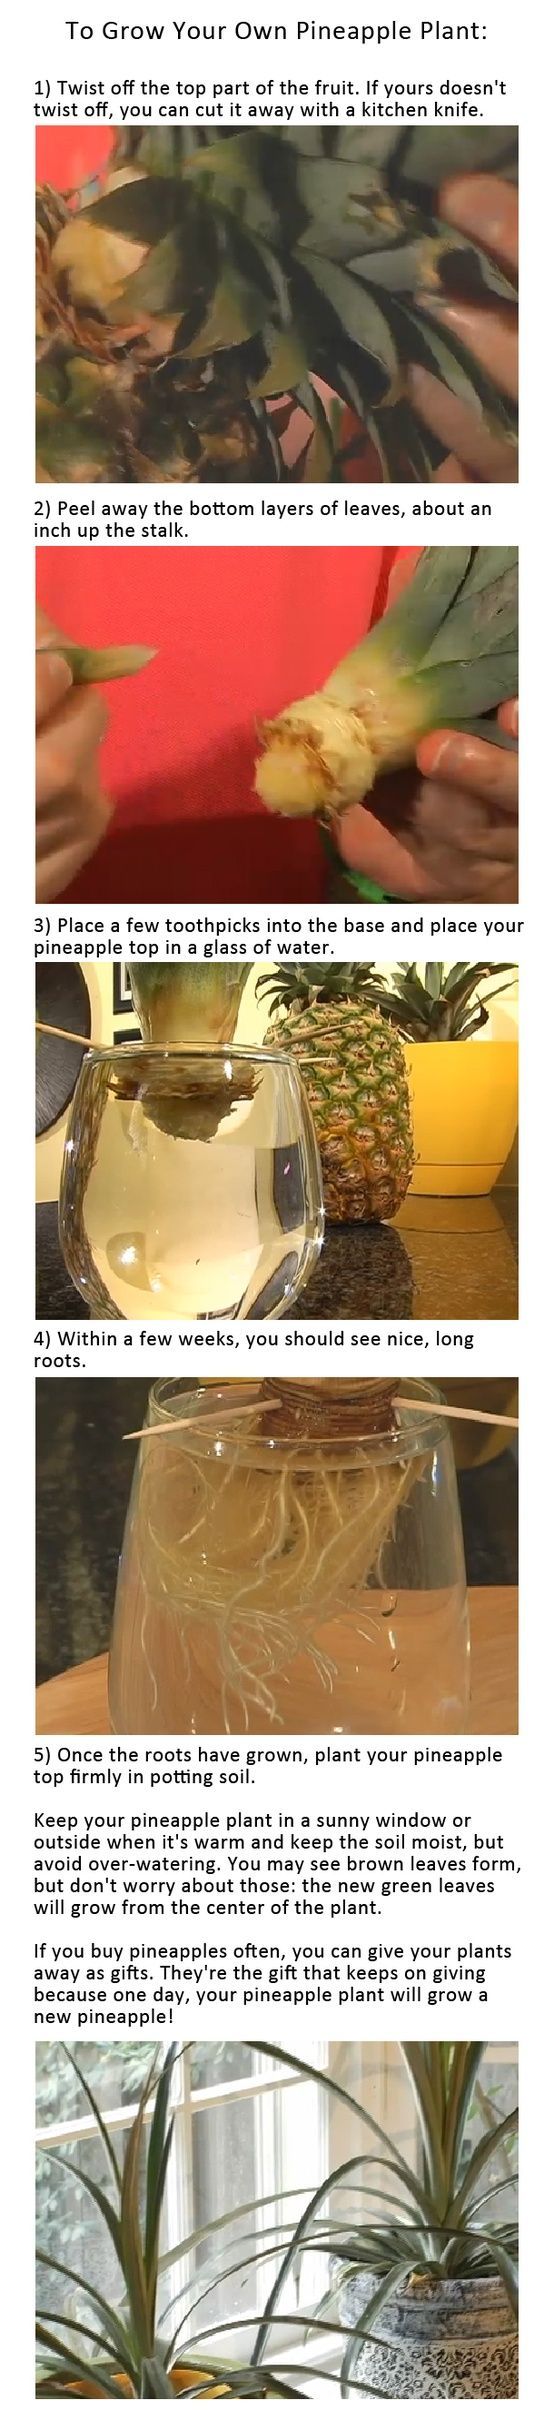 Grow your own pineapple!!!